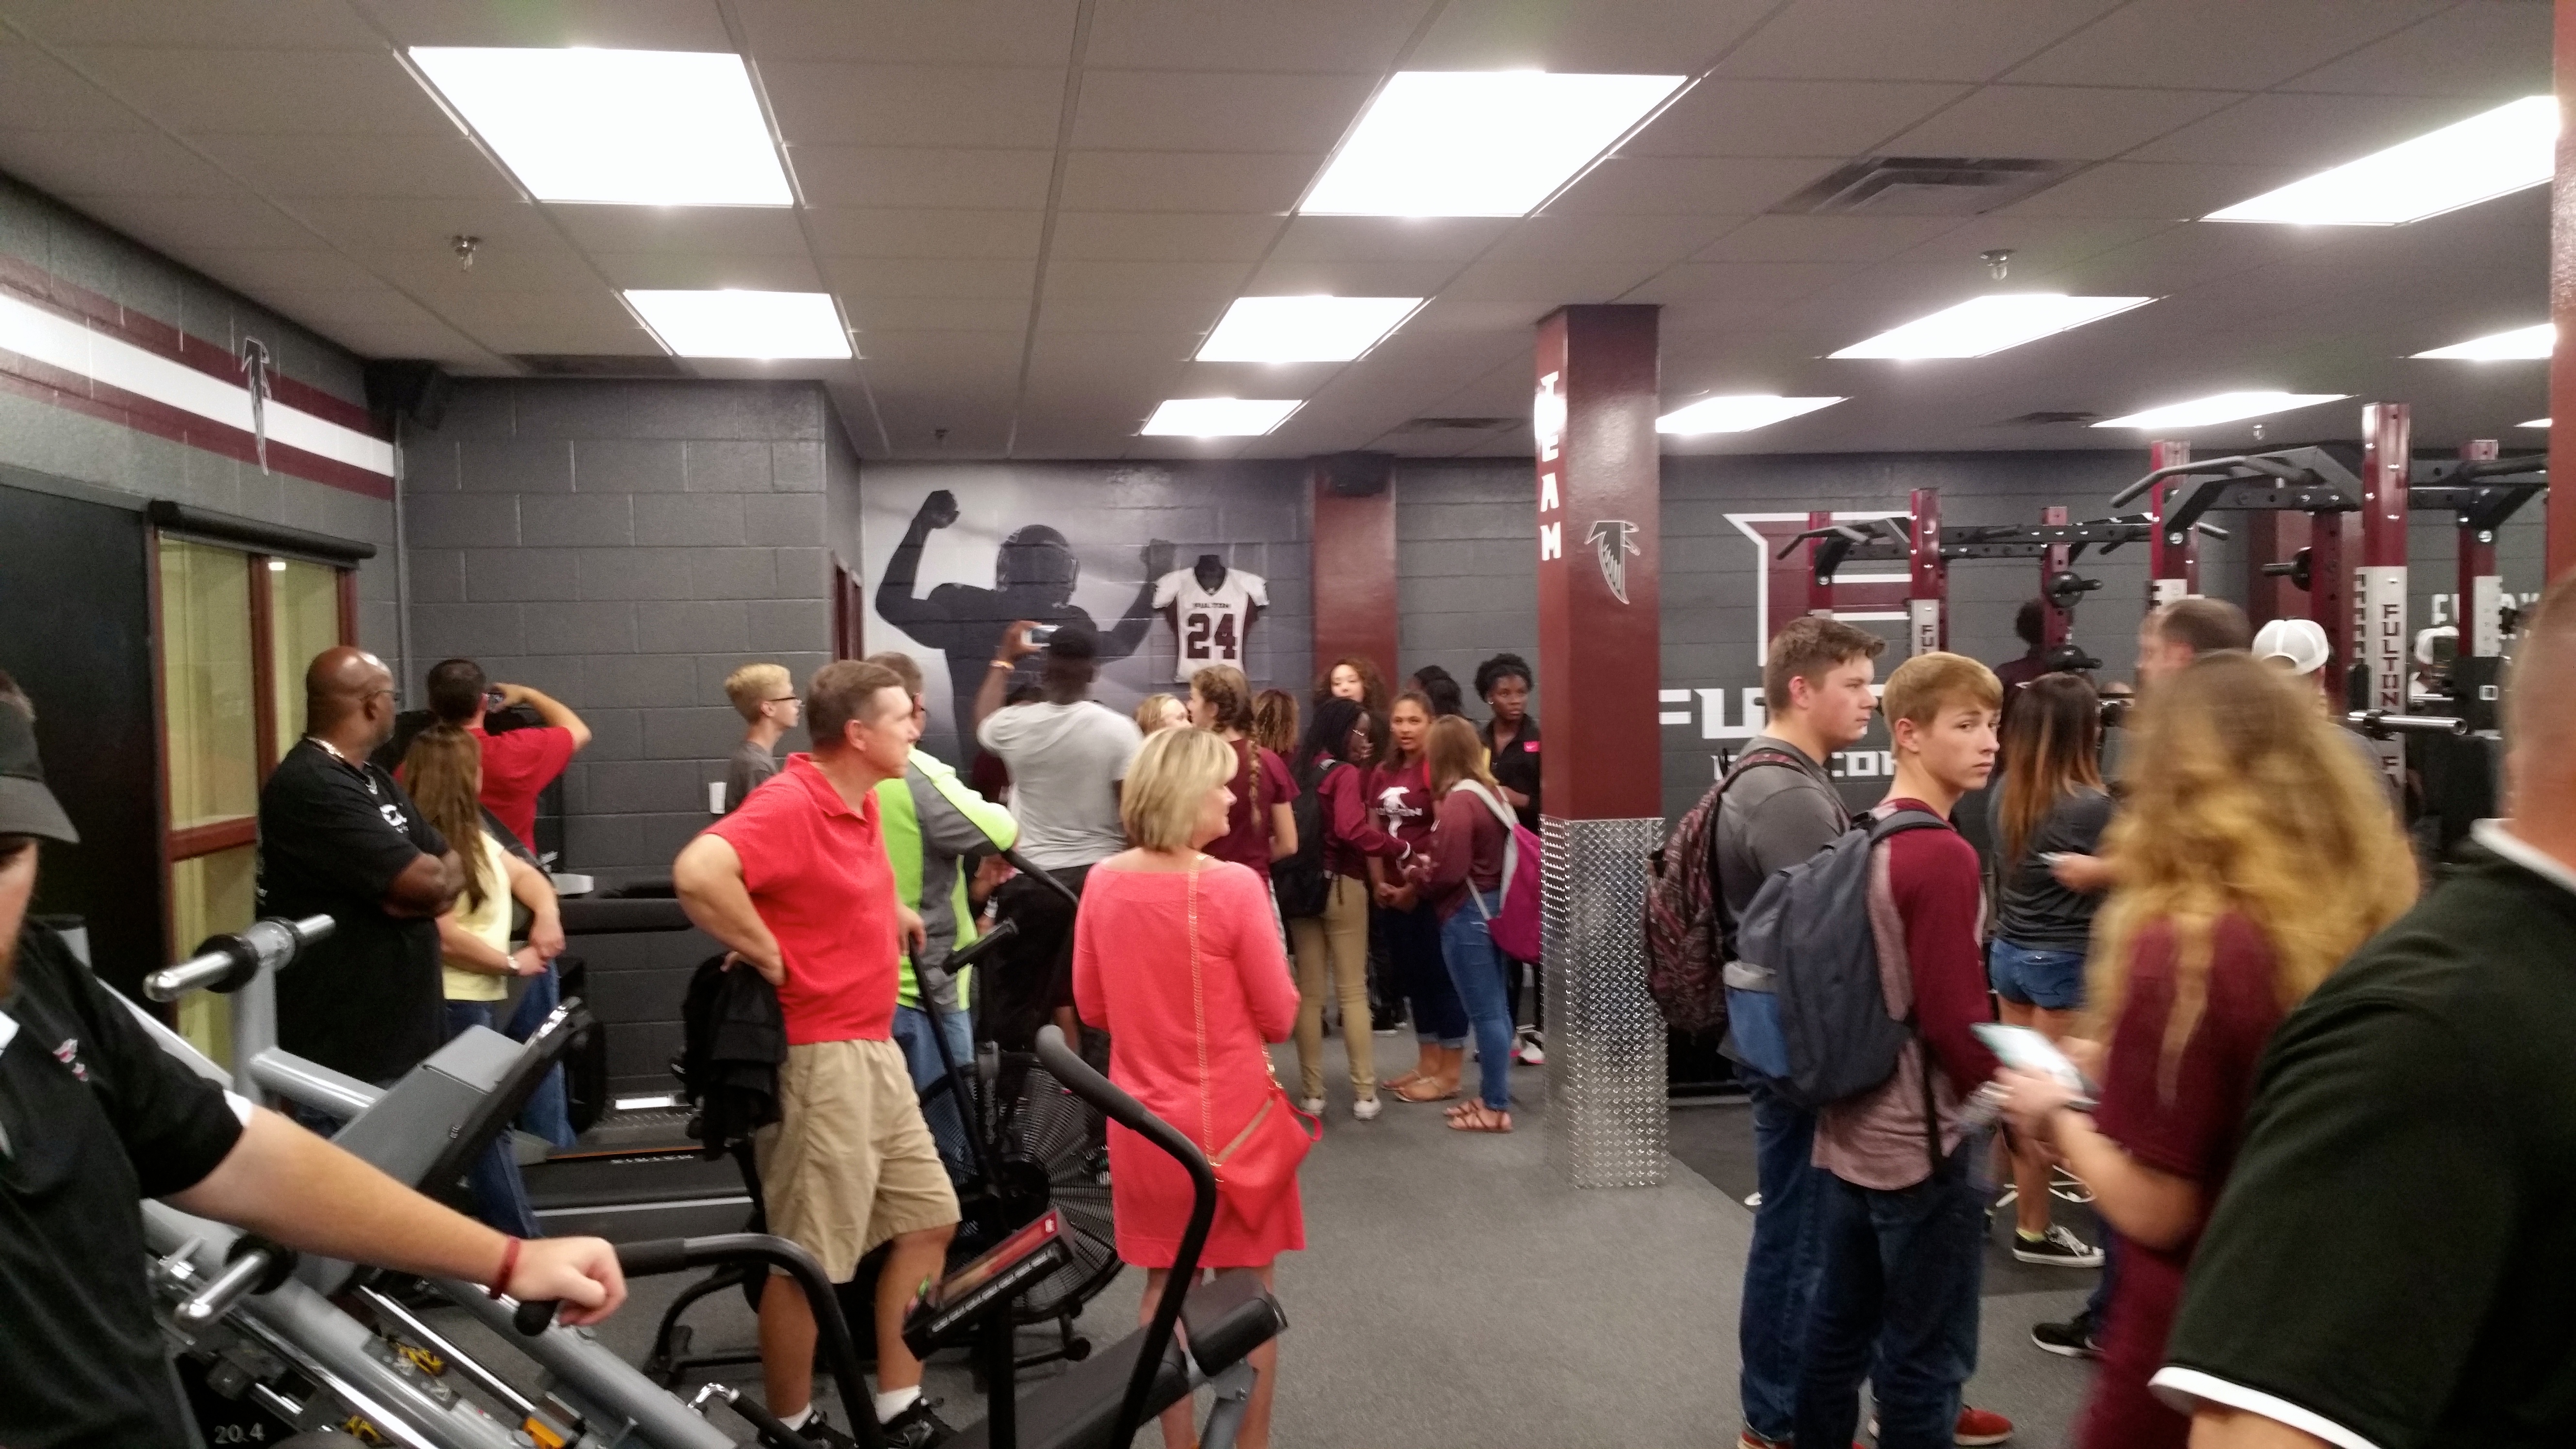 Zaevion Dobson Weight Room Opening, September 23, 2016